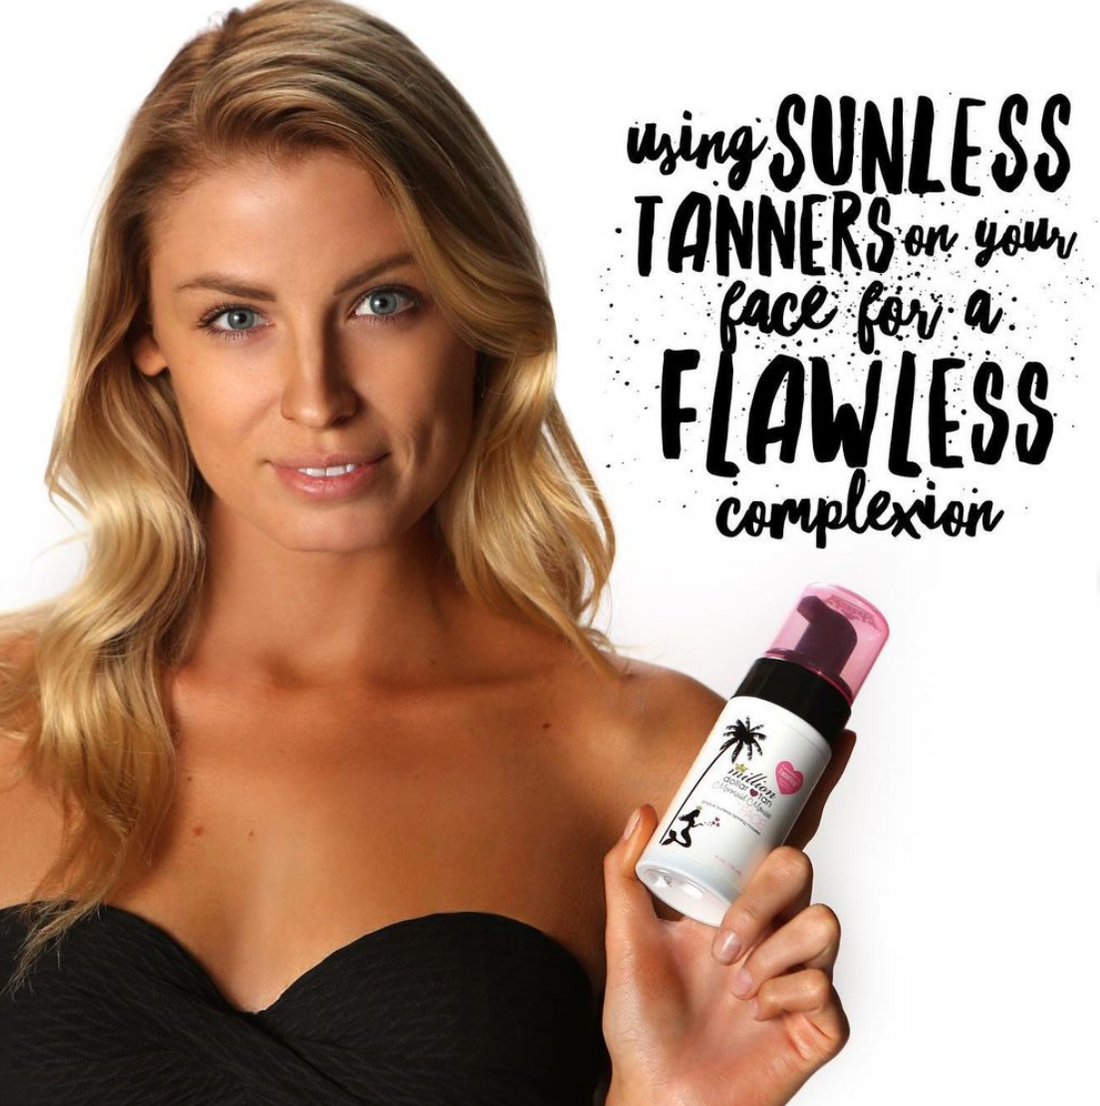 Episode 22: Using sunless tanners on your face for a flawless complexion